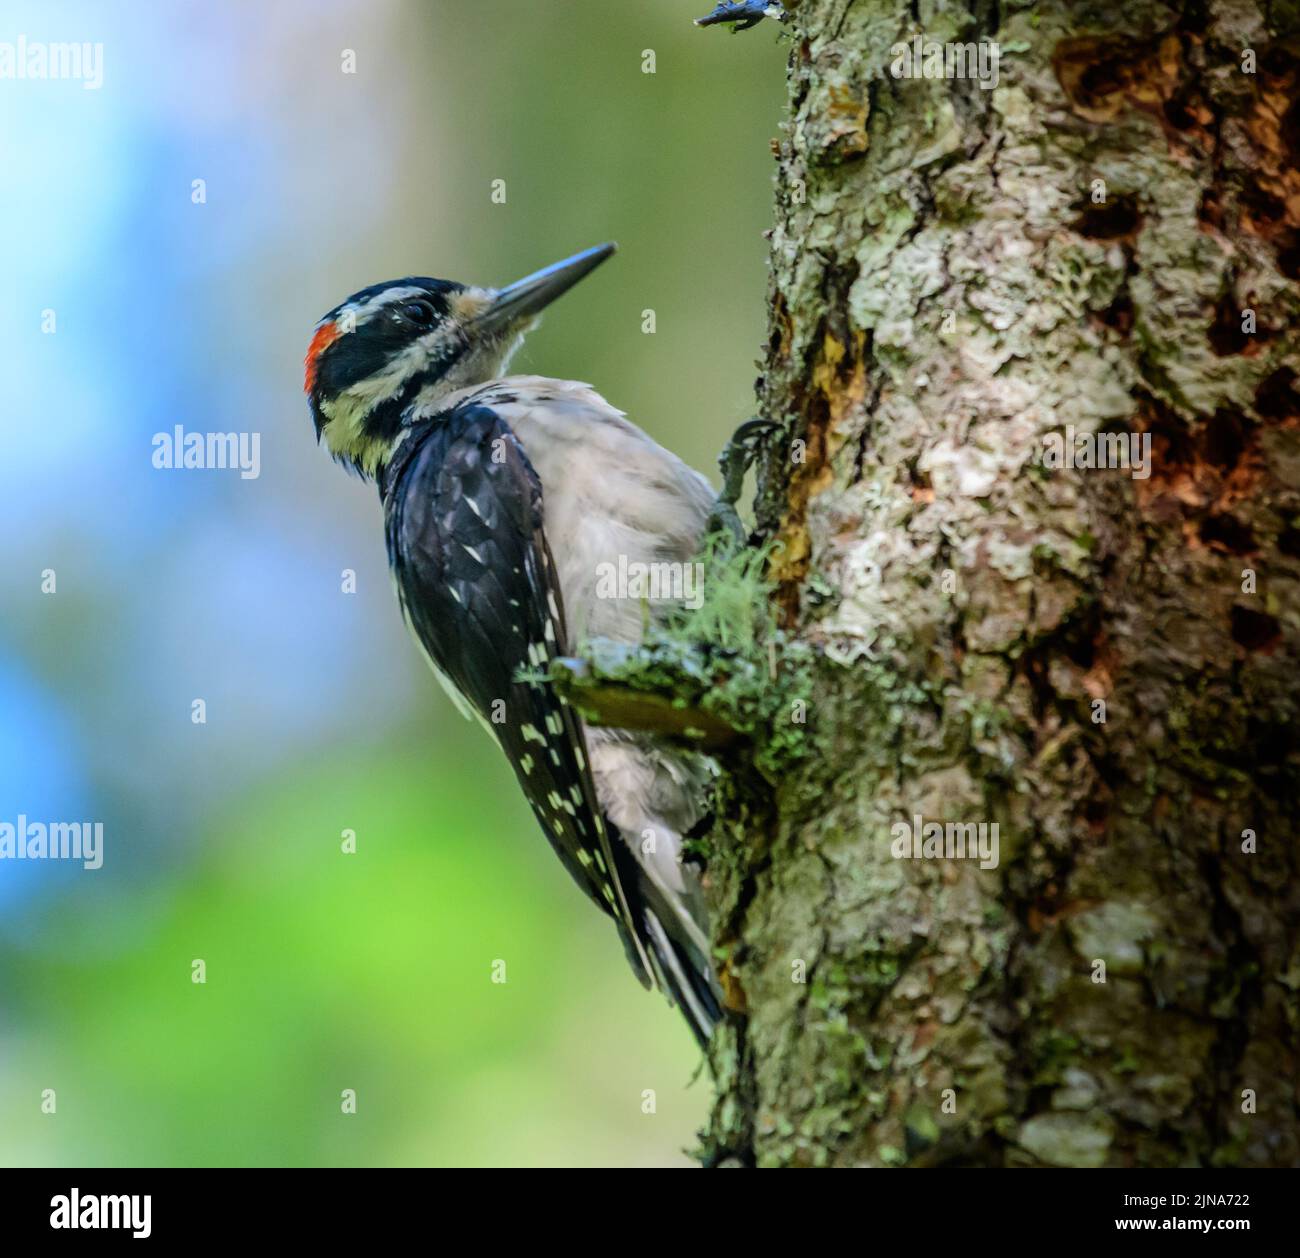 Close-Up of a Hairy Woodpecker on a tree trunk, British Columbia, Canada Stock Photo